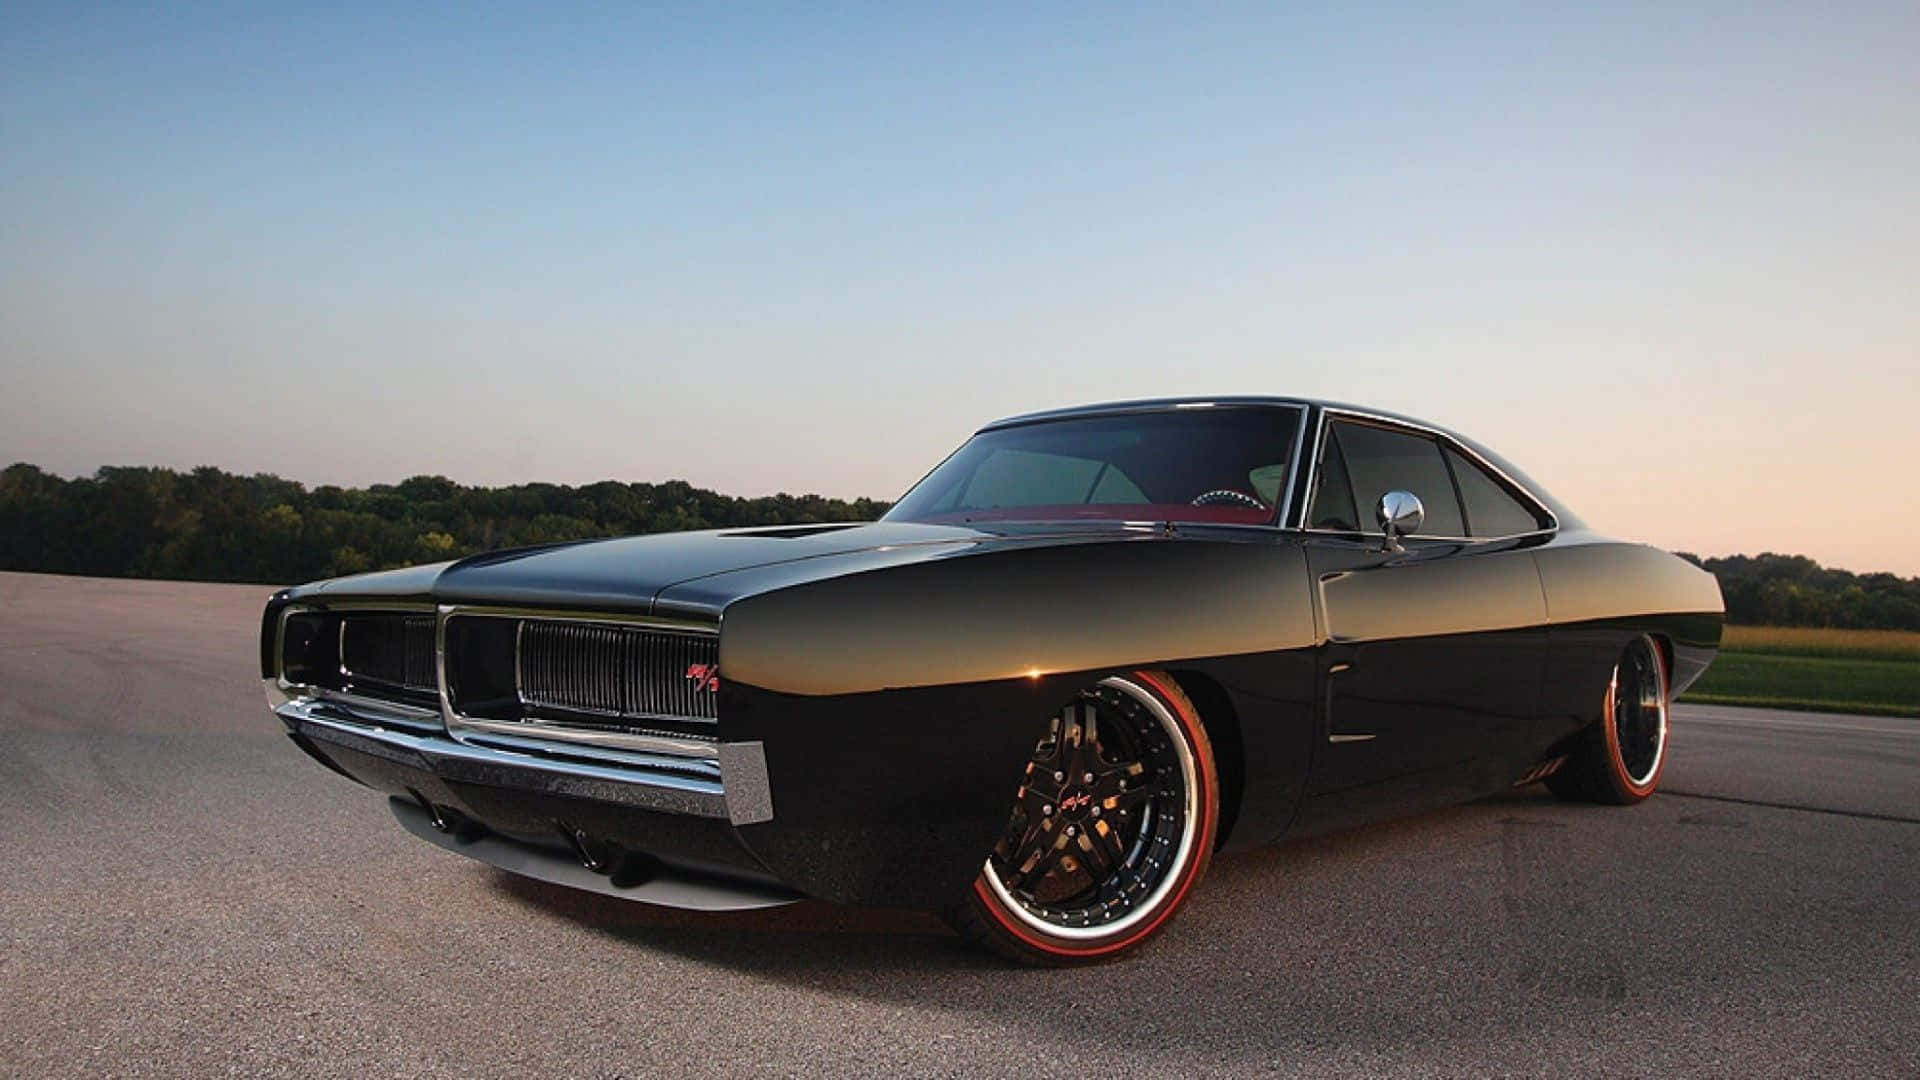 Powerful Dodge Charger in Action Wallpaper